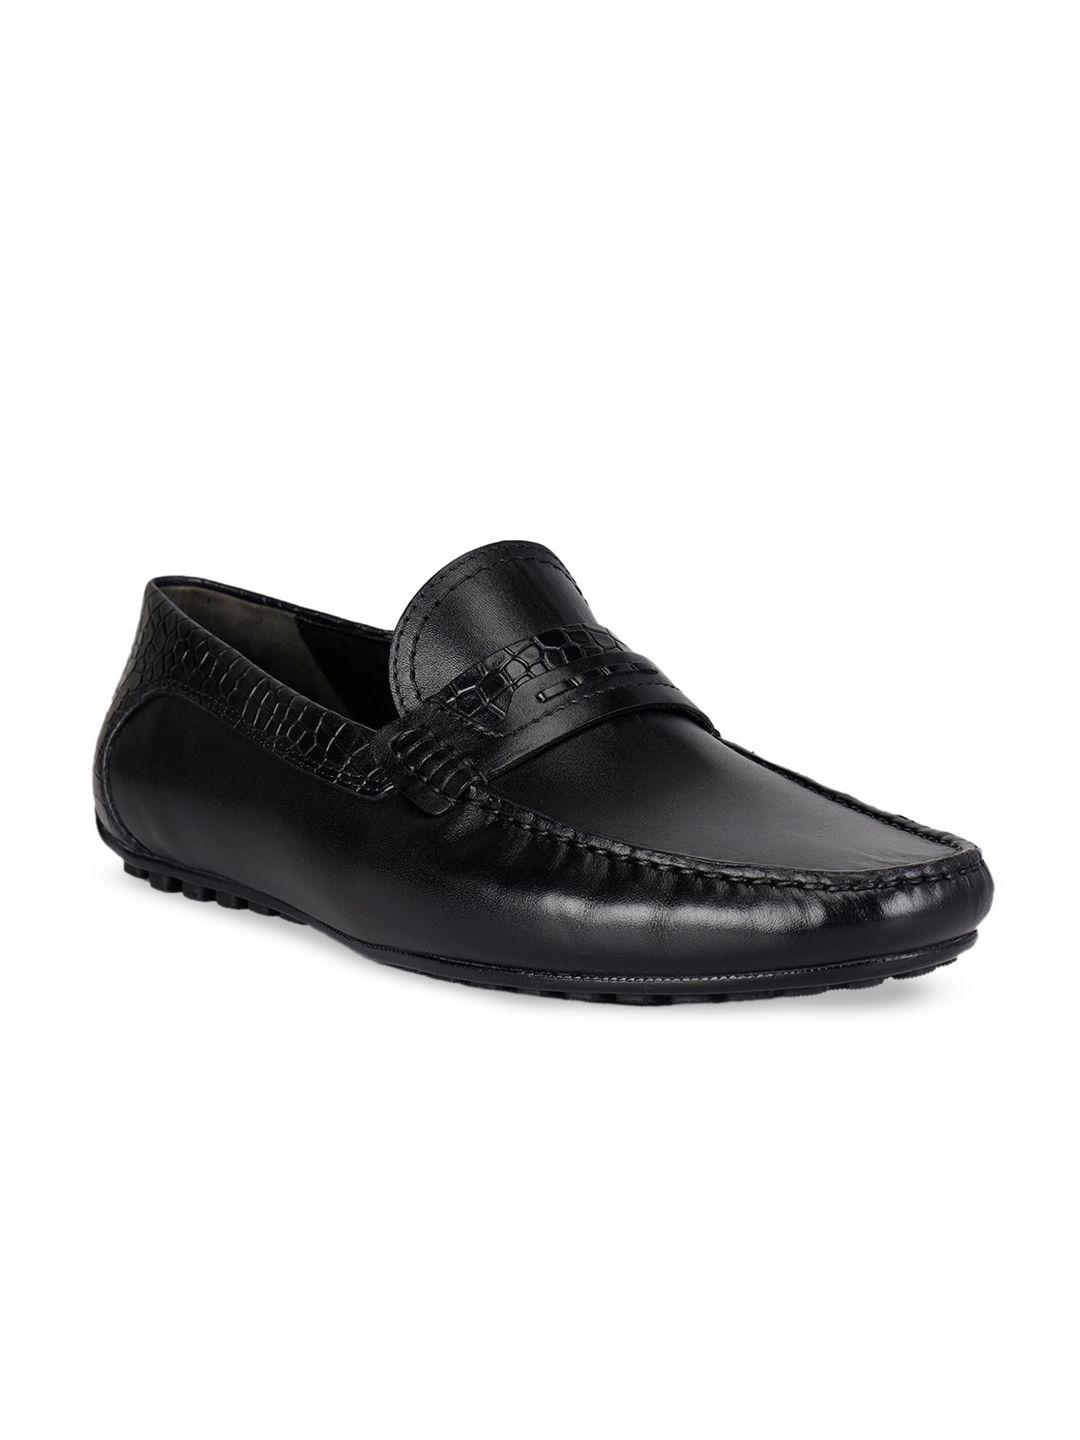 ROSSO BRUNELLO Men Textured Leather Formal Penny Loafers